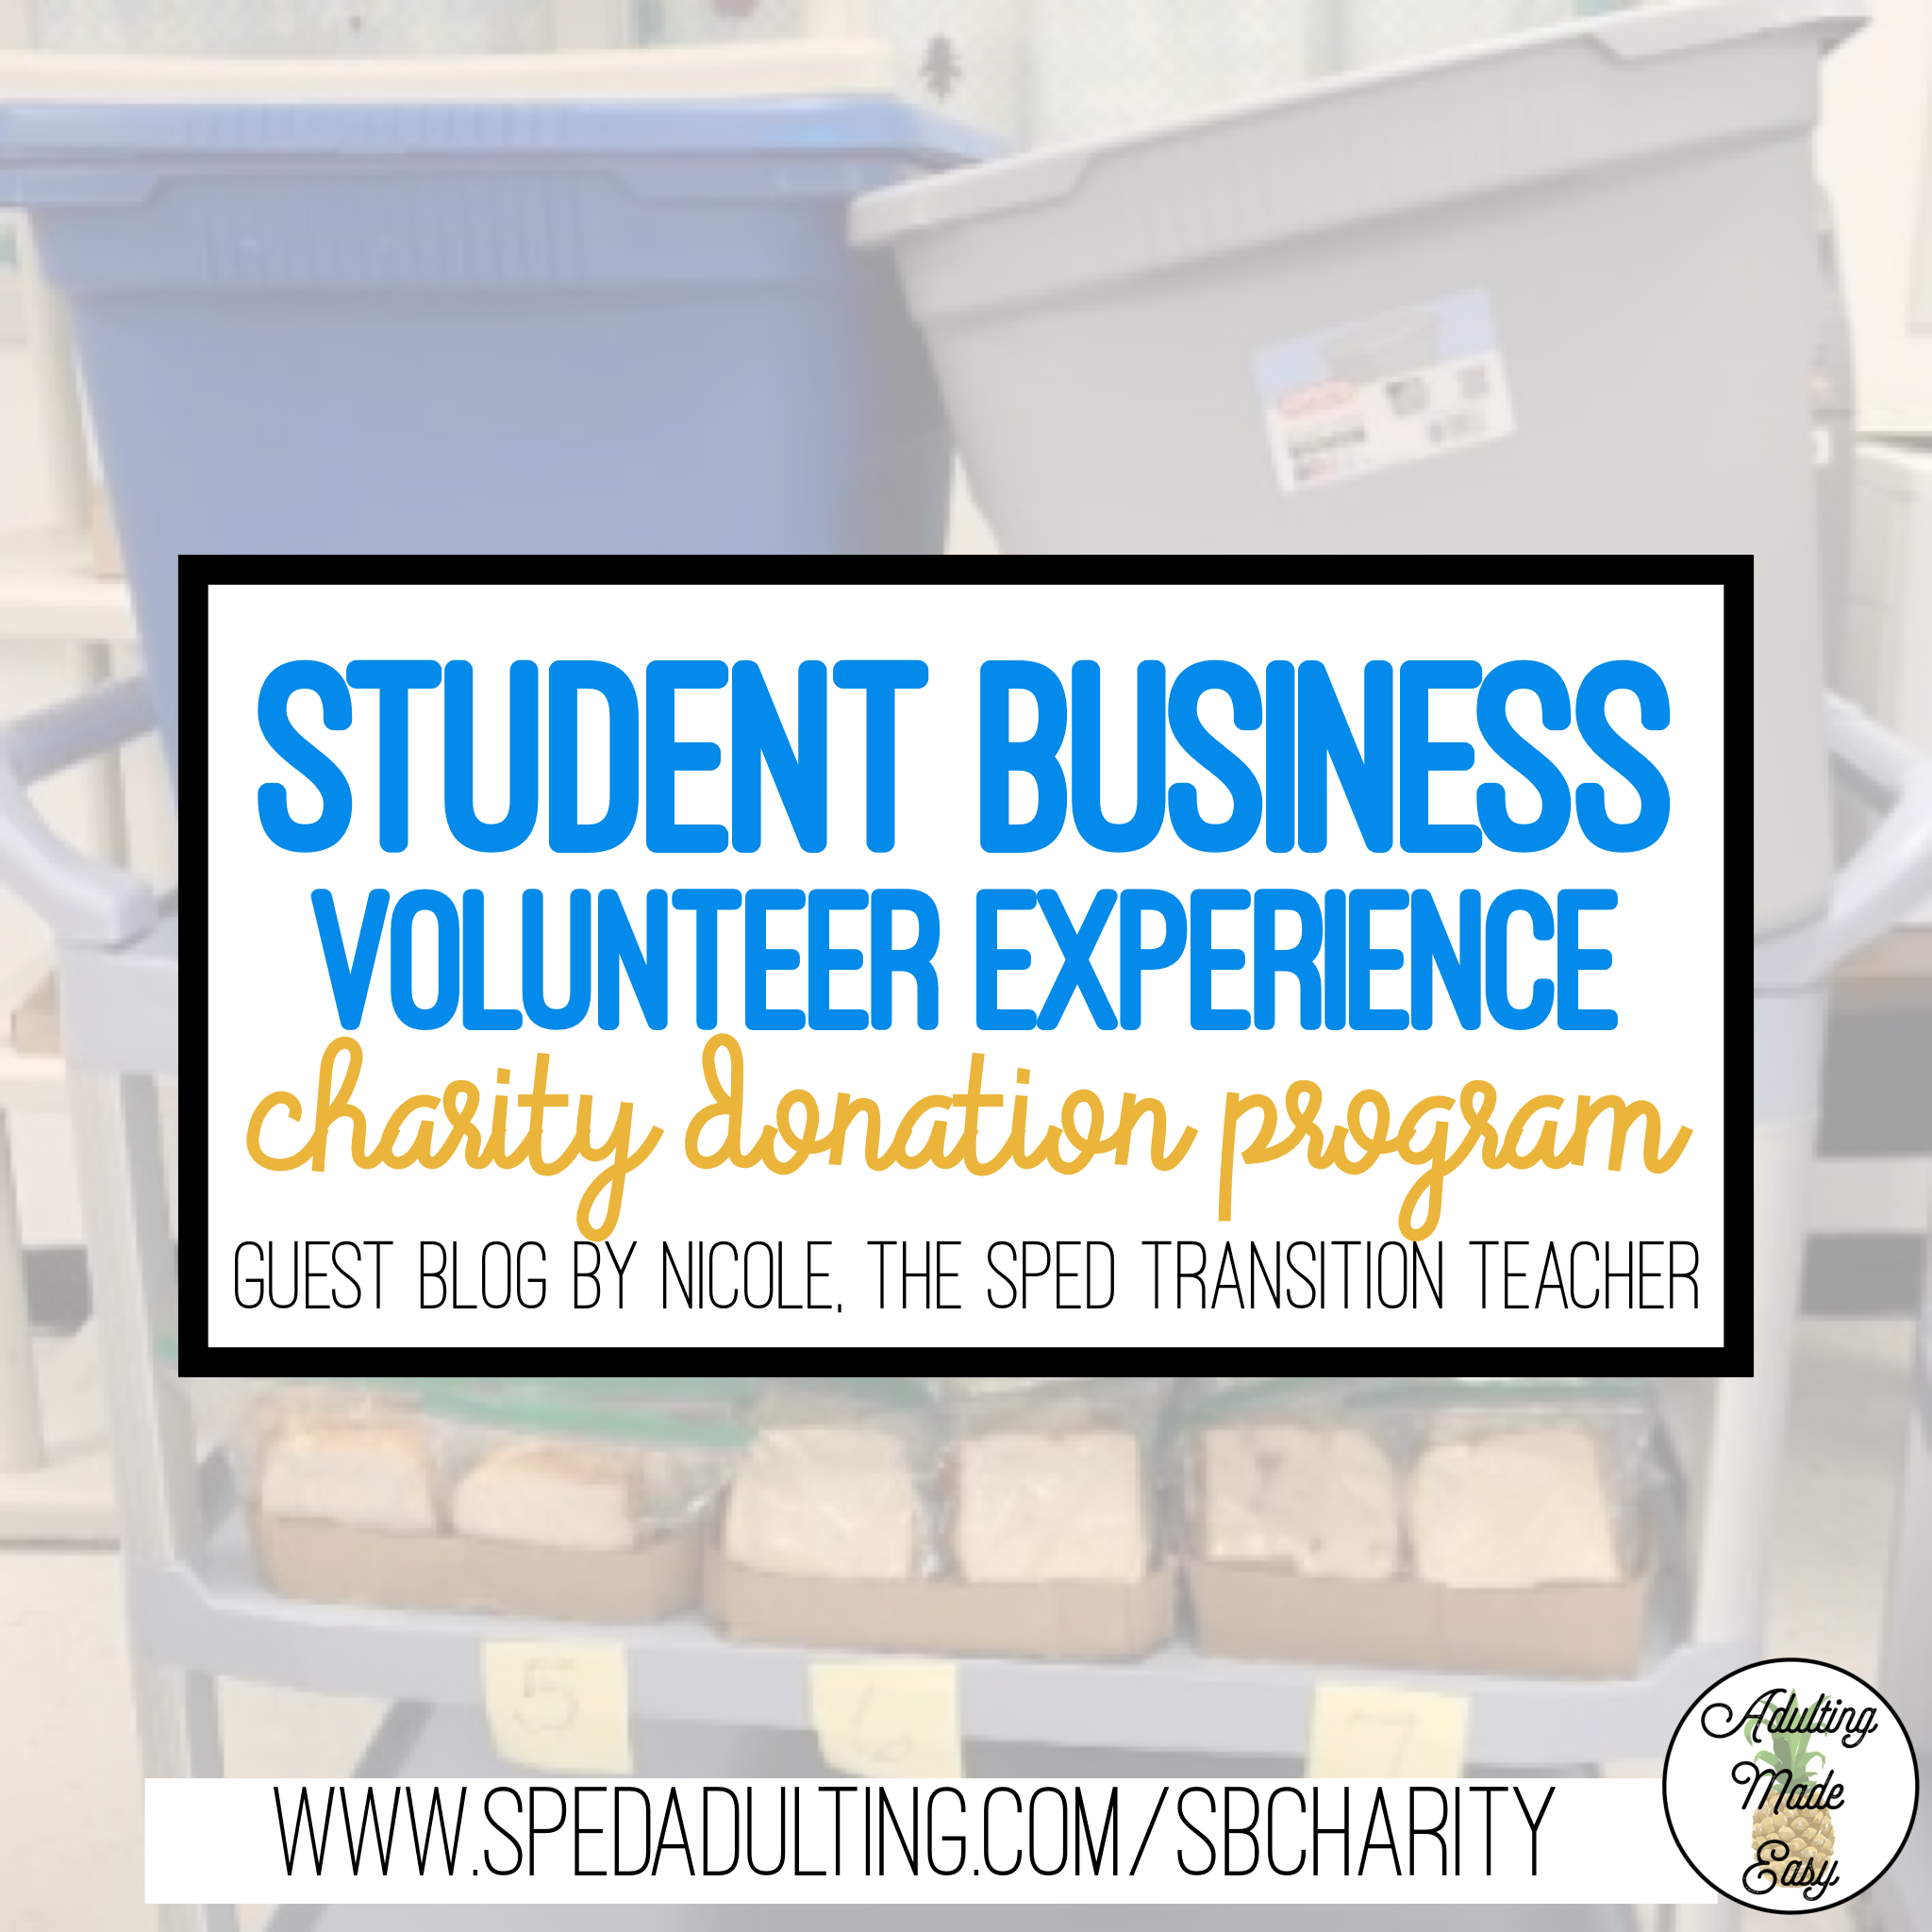 BLOG: Student Business Volunteer Experience charity donation program for special education students